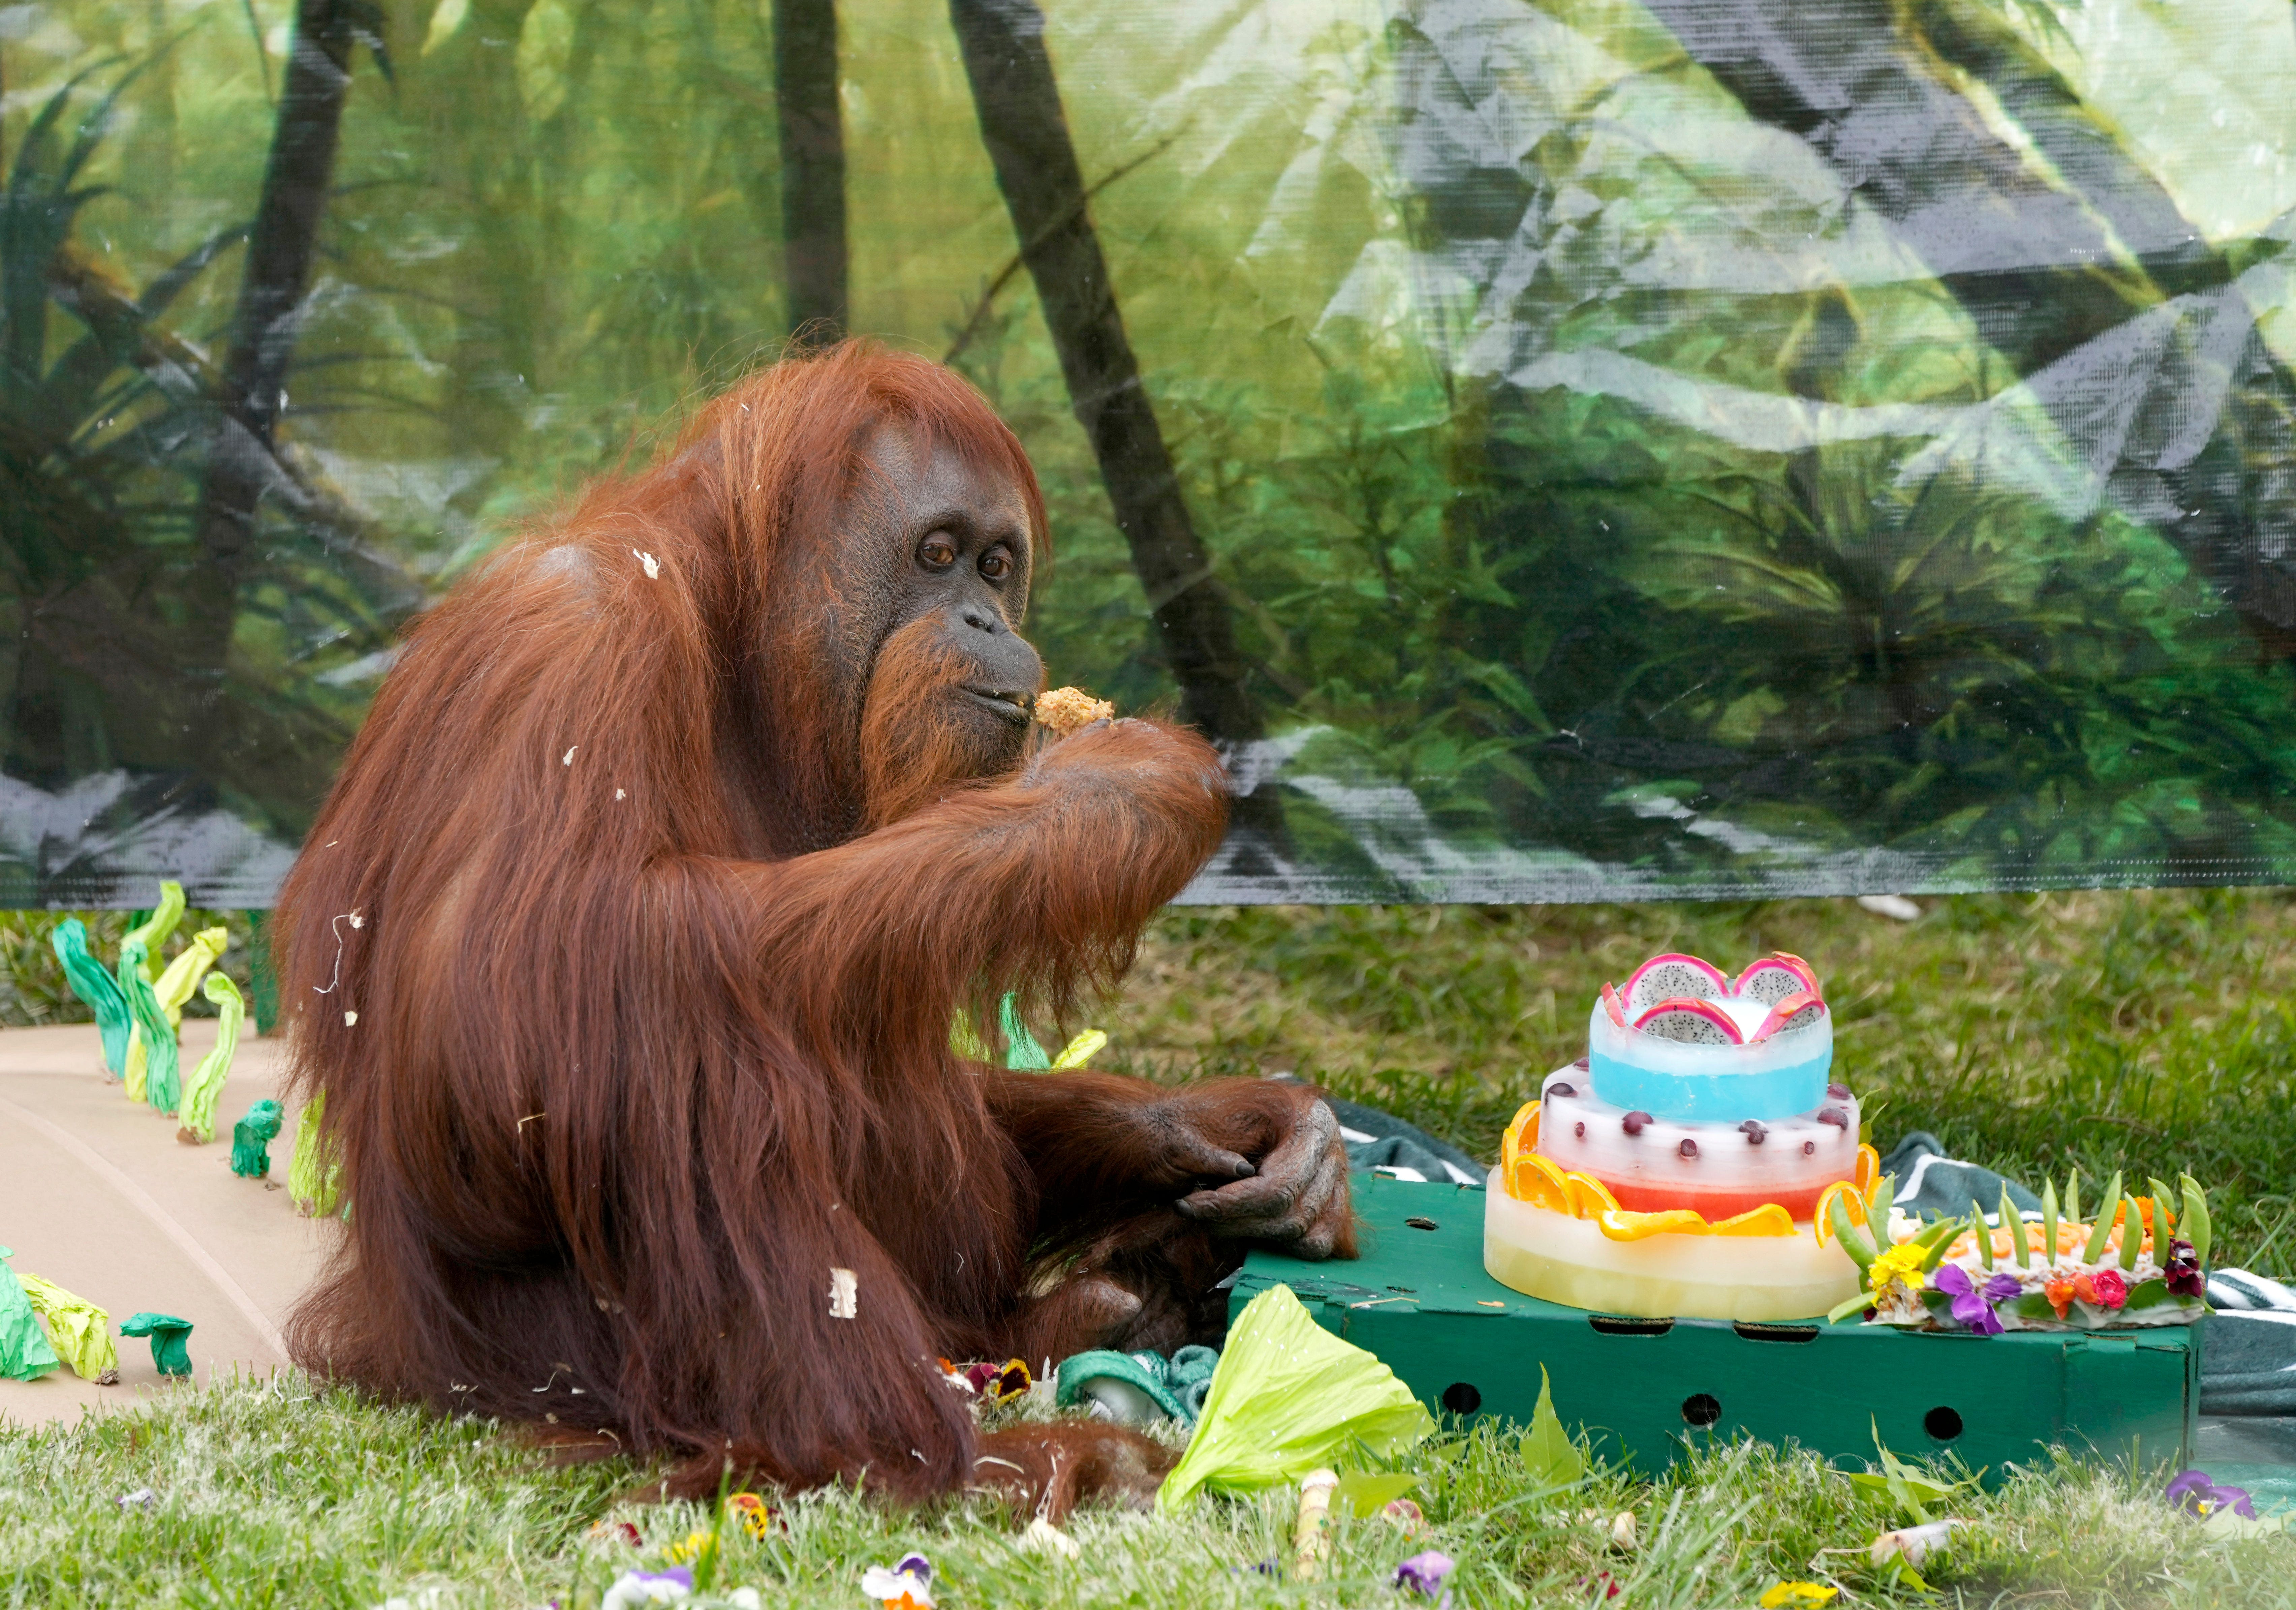 Columbus Zoo holds 50th birthday party for Dumplin, one of the oldest orangutans in the US